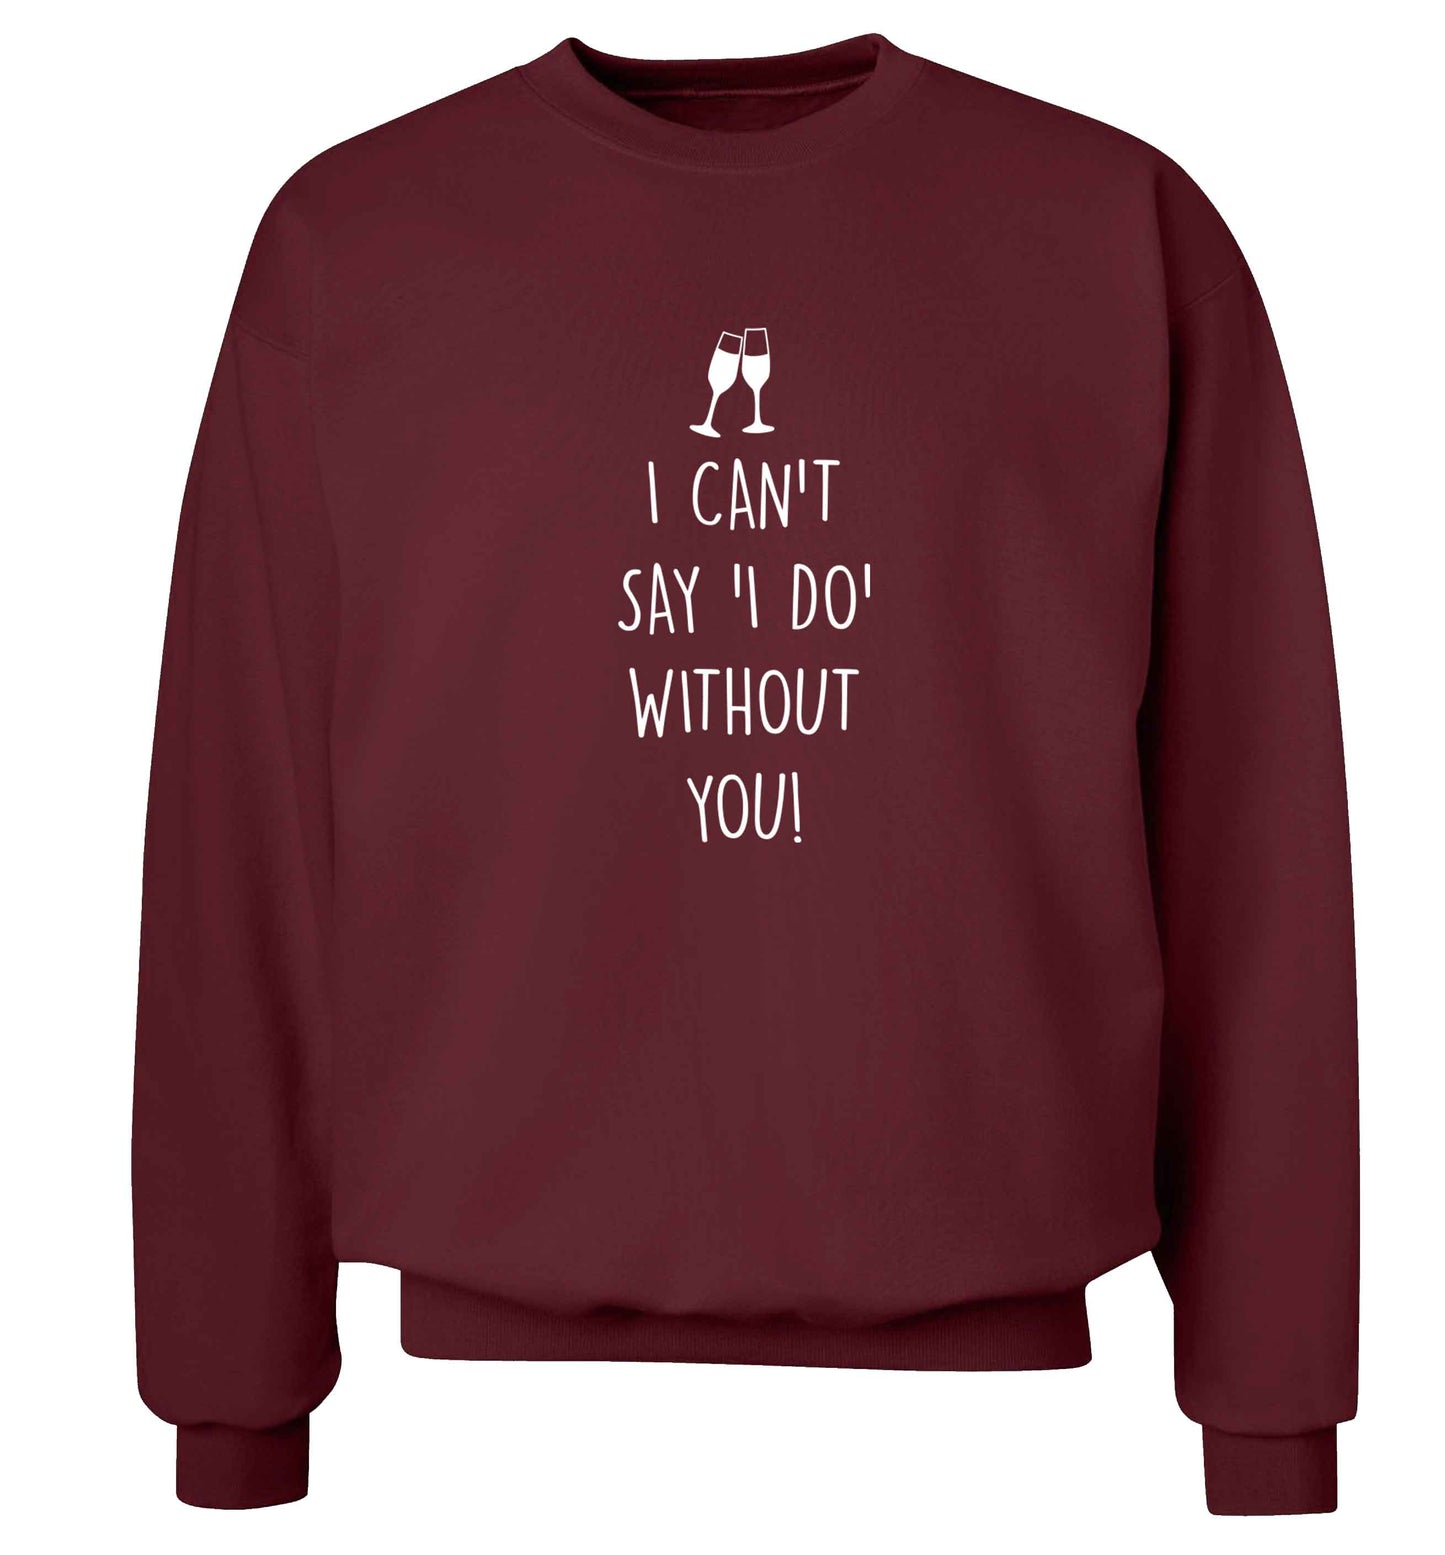 I can't say 'I do' without you! adult's unisex maroon sweater 2XL